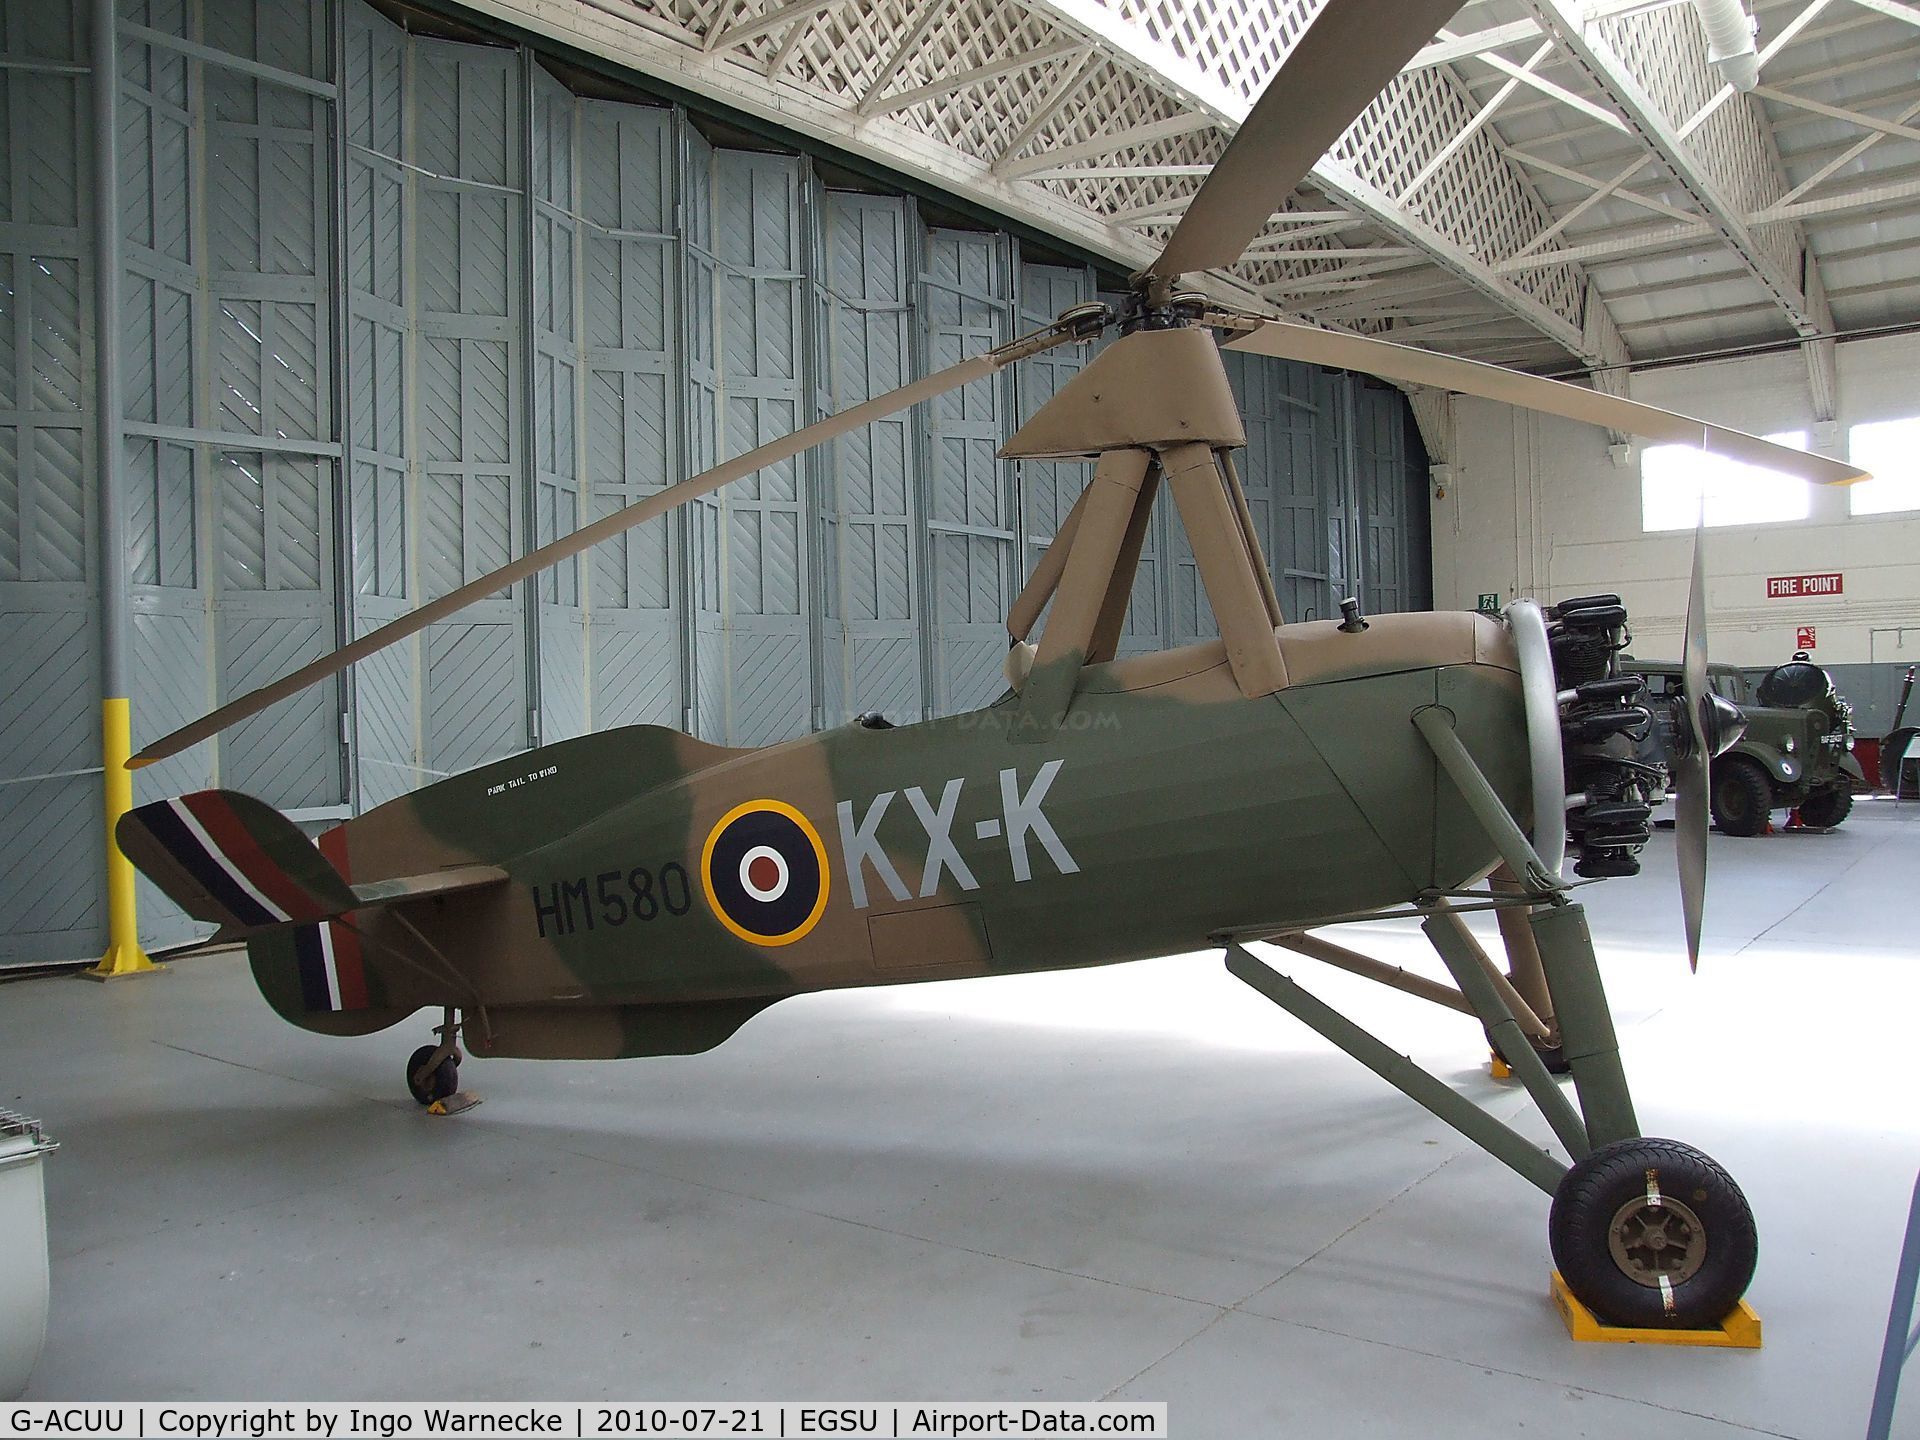 G-ACUU, 1934 Avro 671 Rota I (Cierva C-30A) C/N 726, Cierva C.30A at the Imperial War Museum, Duxford